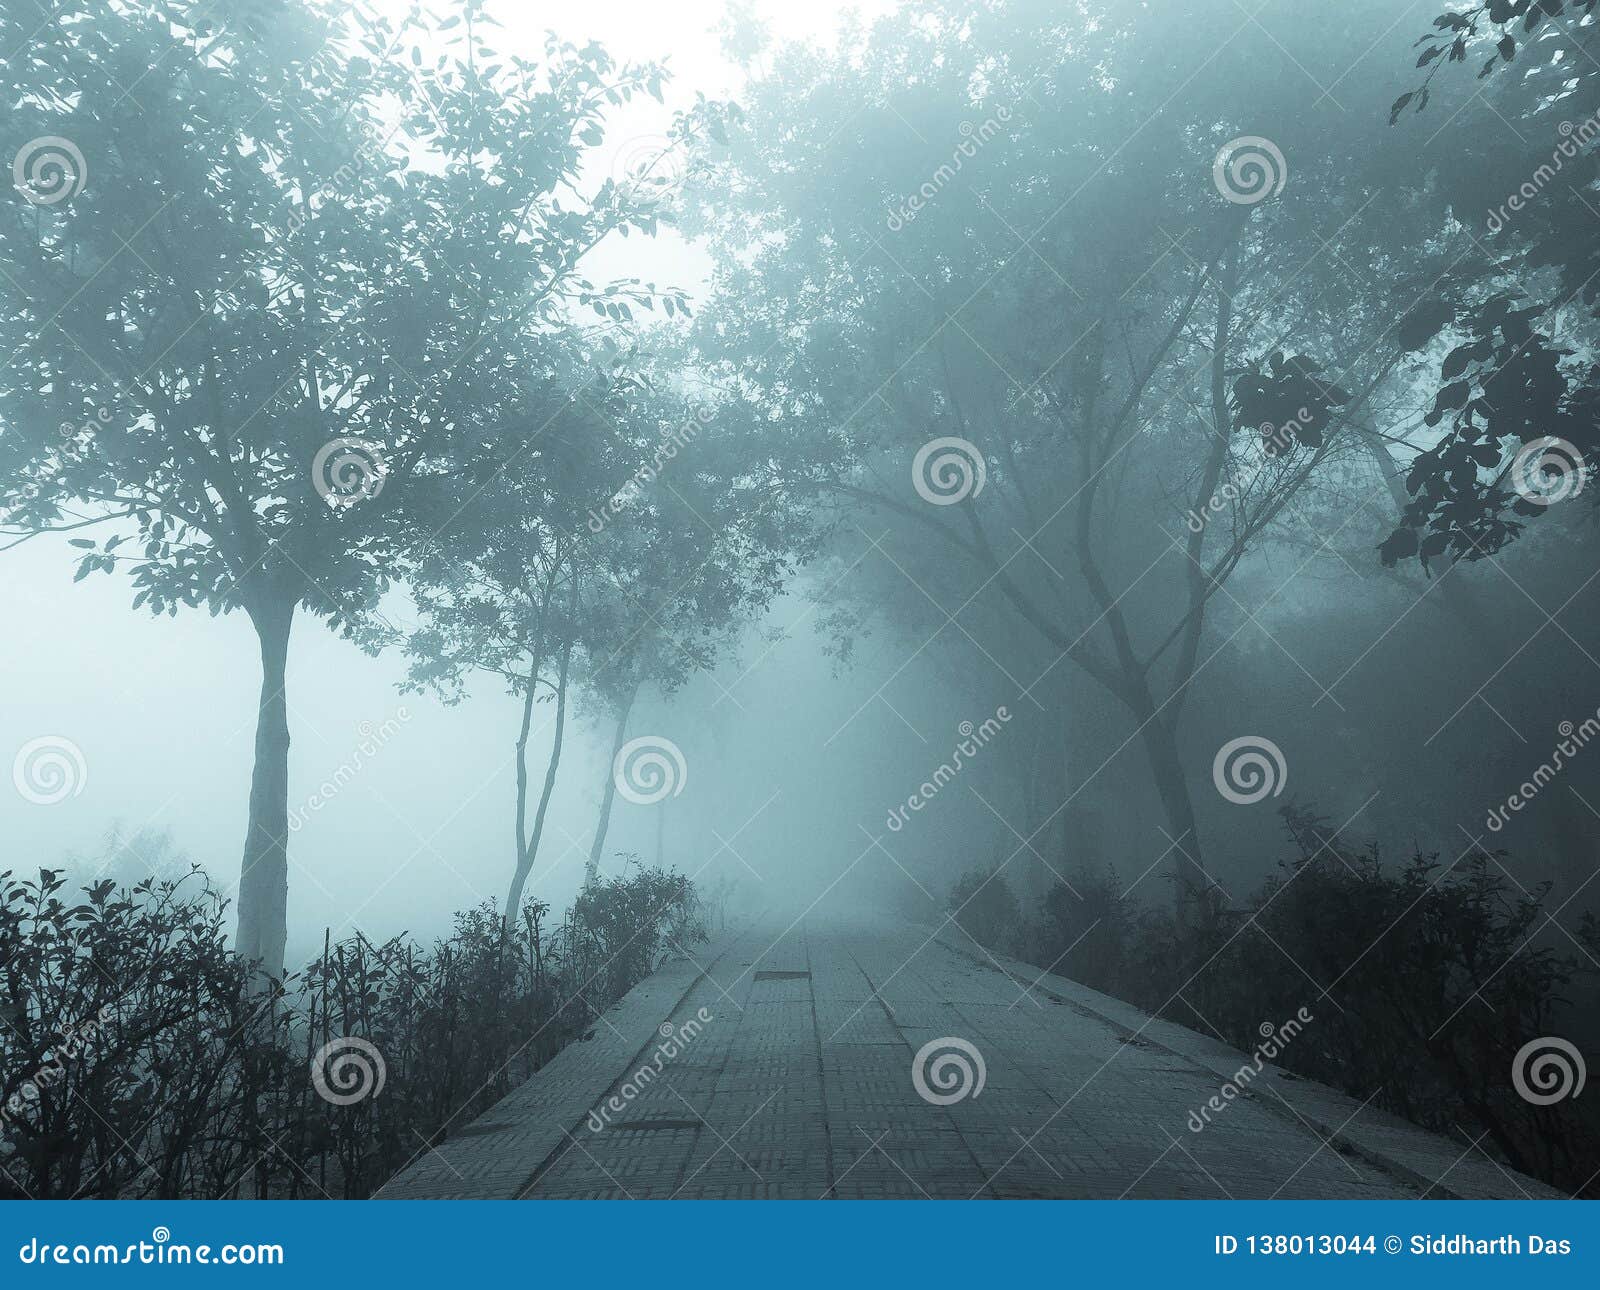 Trees and Branches in Foggy Weather Stock Photo - Image of park